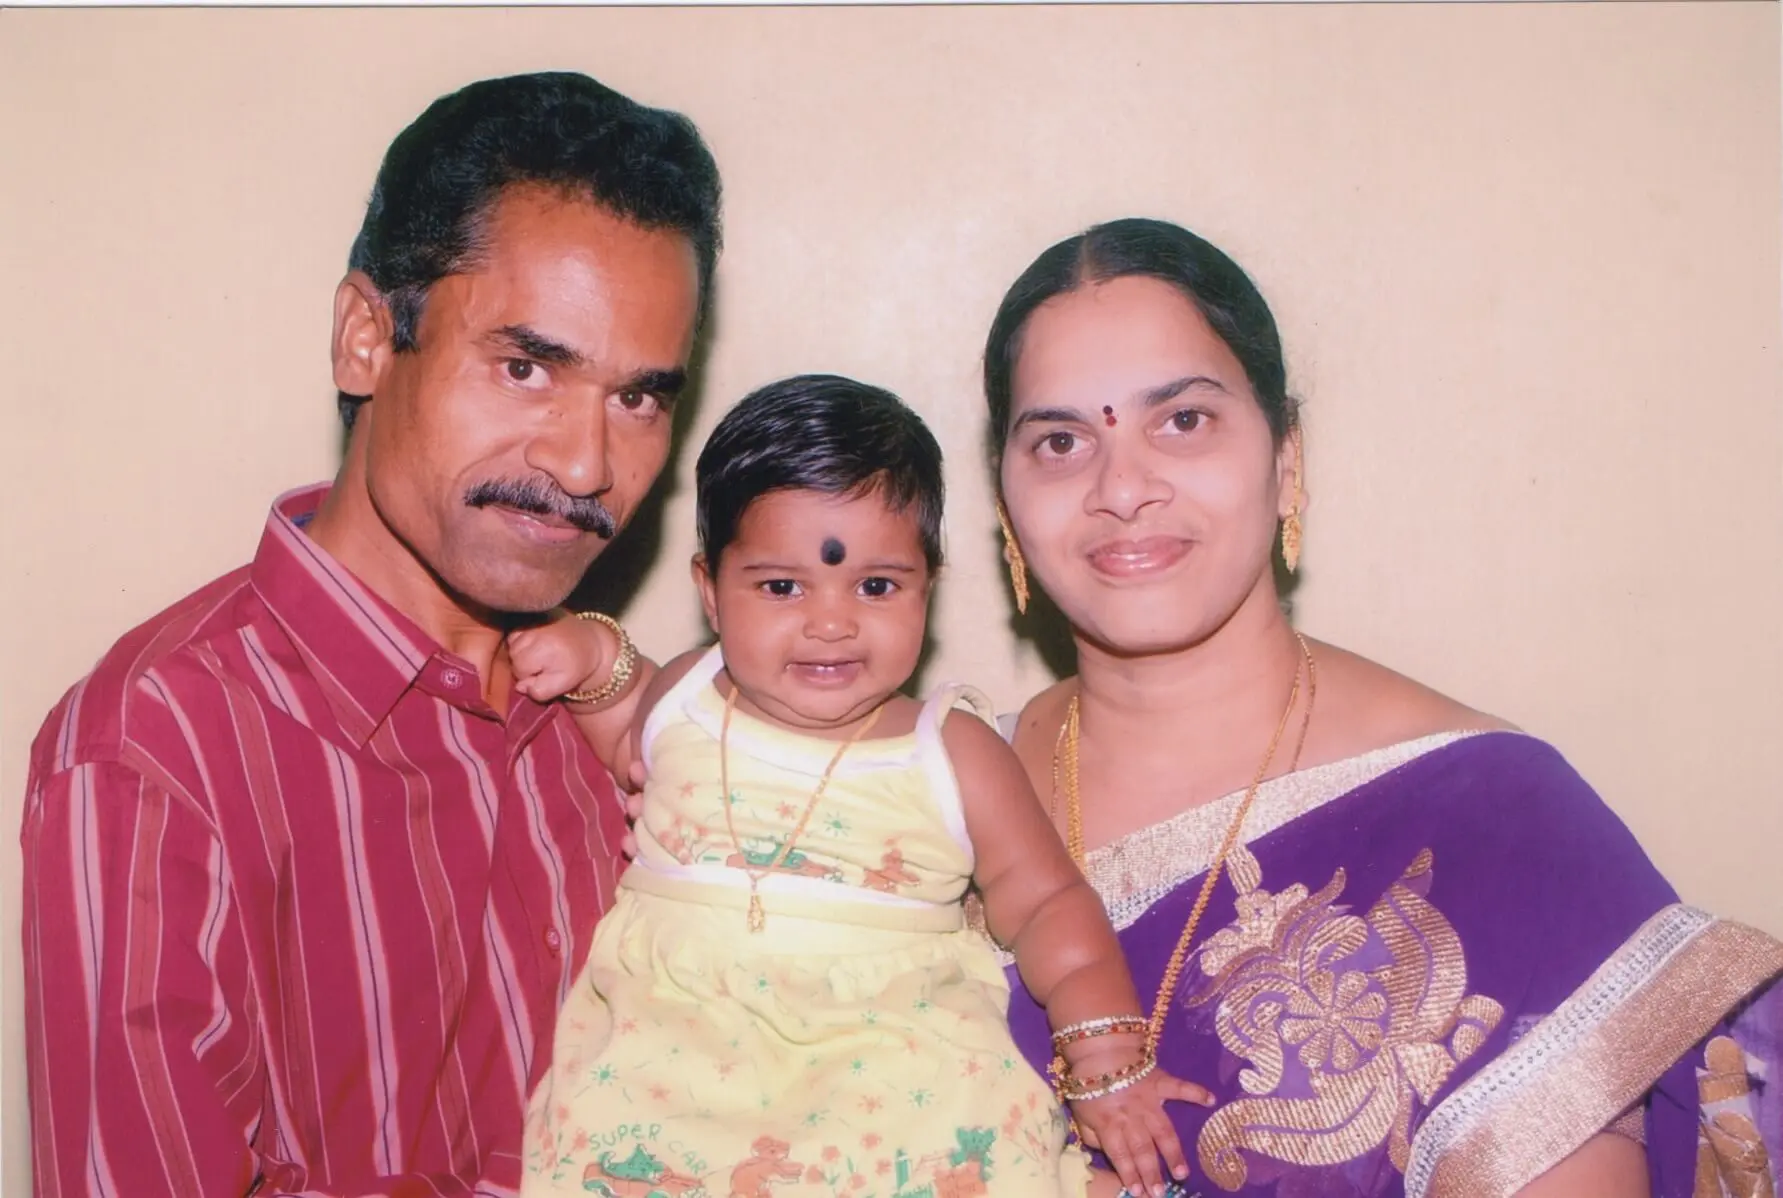 Child born by ICSI treatment at Karthika Datta's IVF clinic in 2012, seen smiling at the camera. Flanked by father (to the left) and mother to the right, both standing and holding the baby.